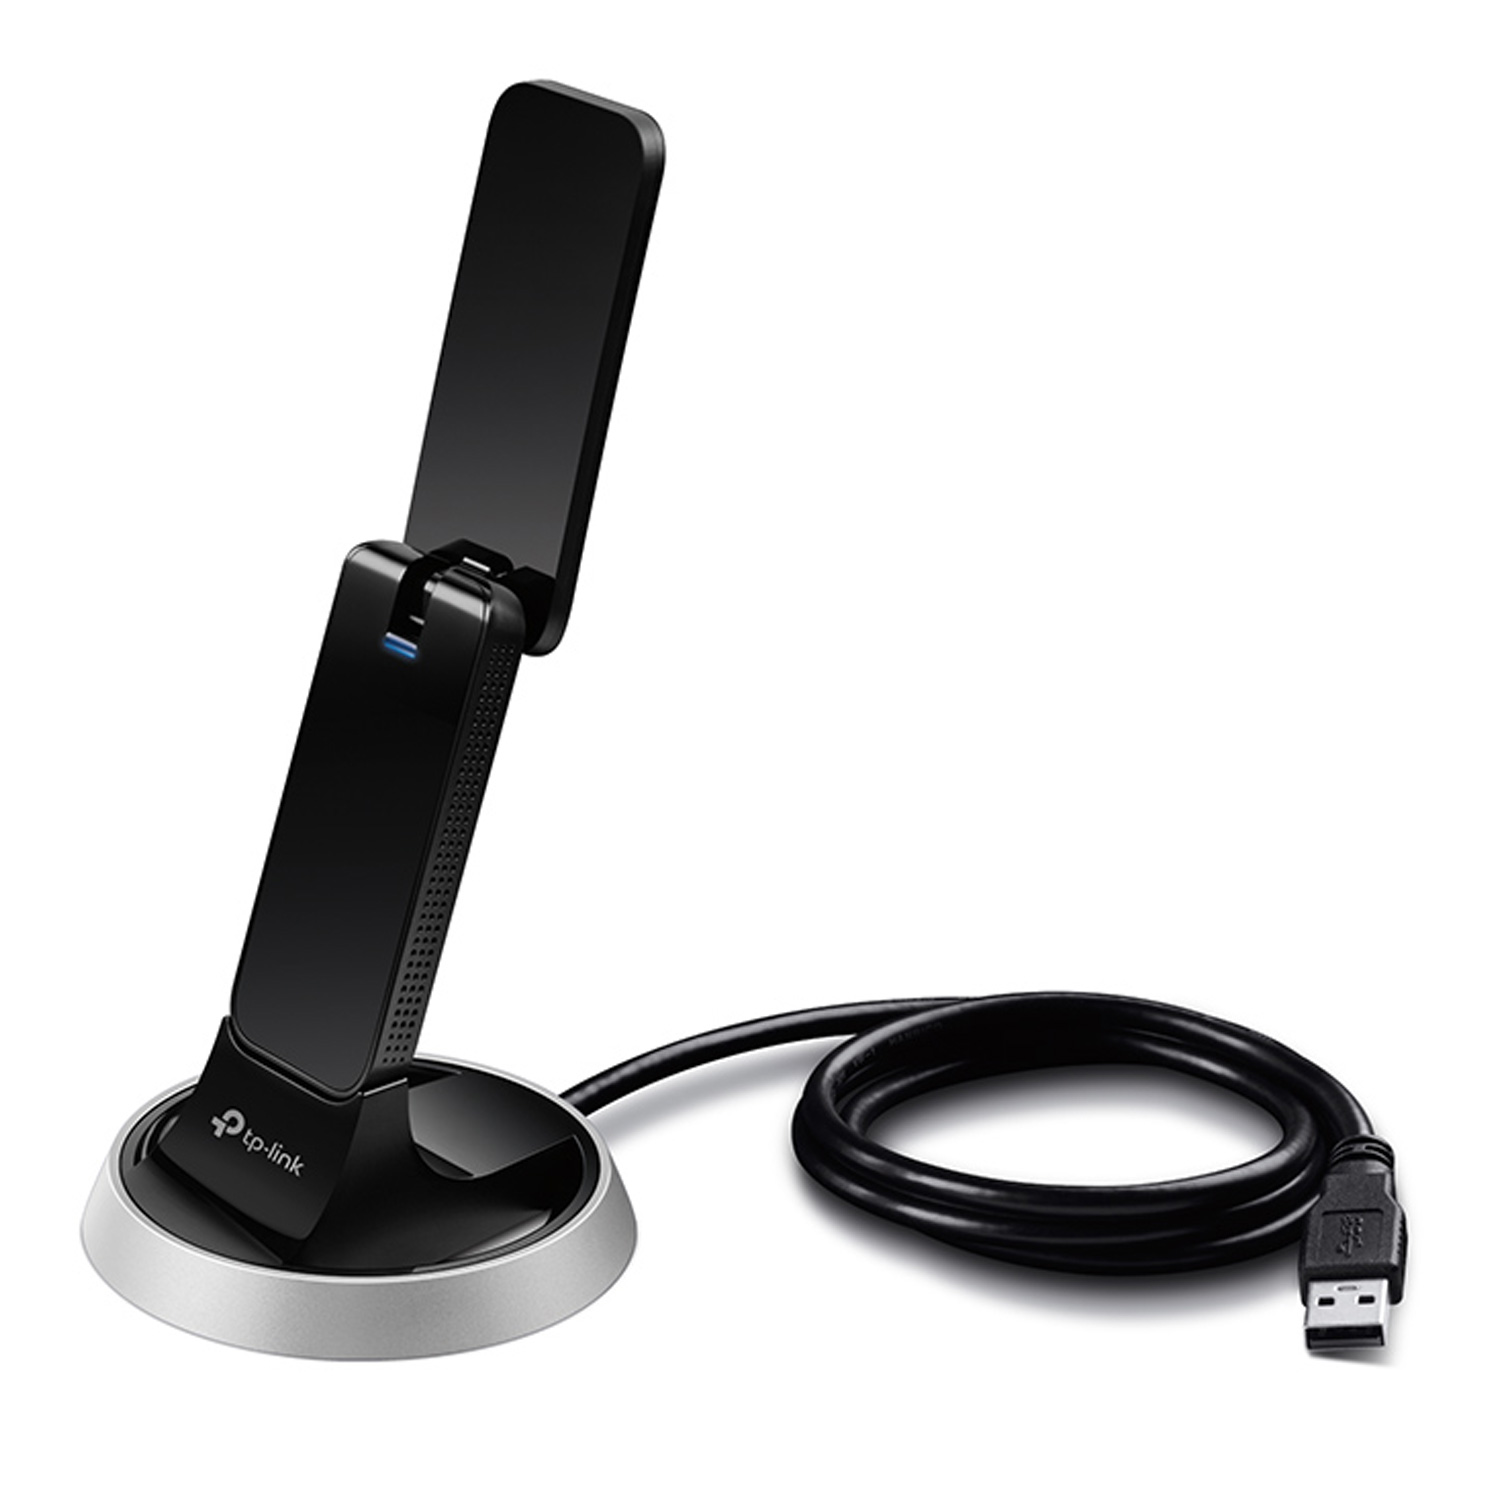 TP-Link Archer T9UH AC1900 Dual Band WiFi USB Adapter - Preto